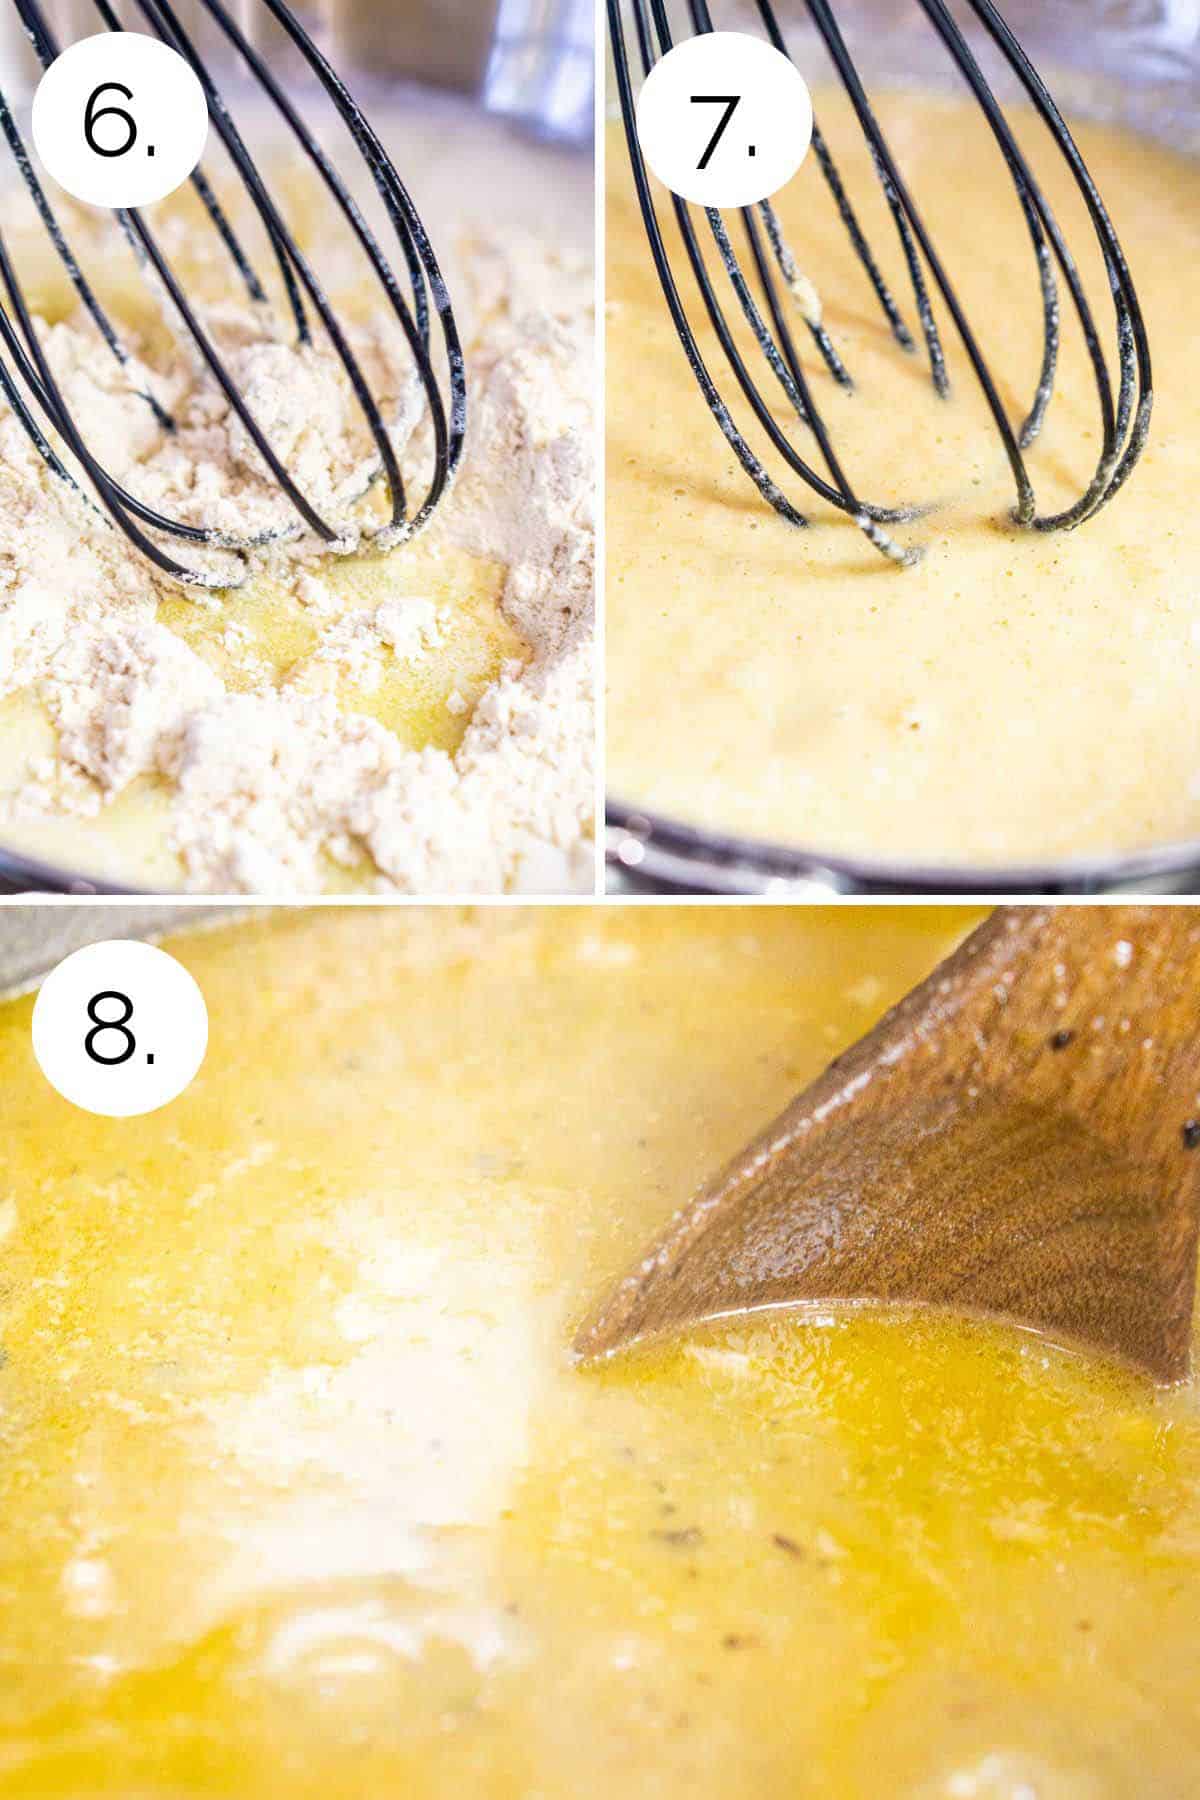 A collage showing the process of whisking the roux and then adding it to the chili to thicken.